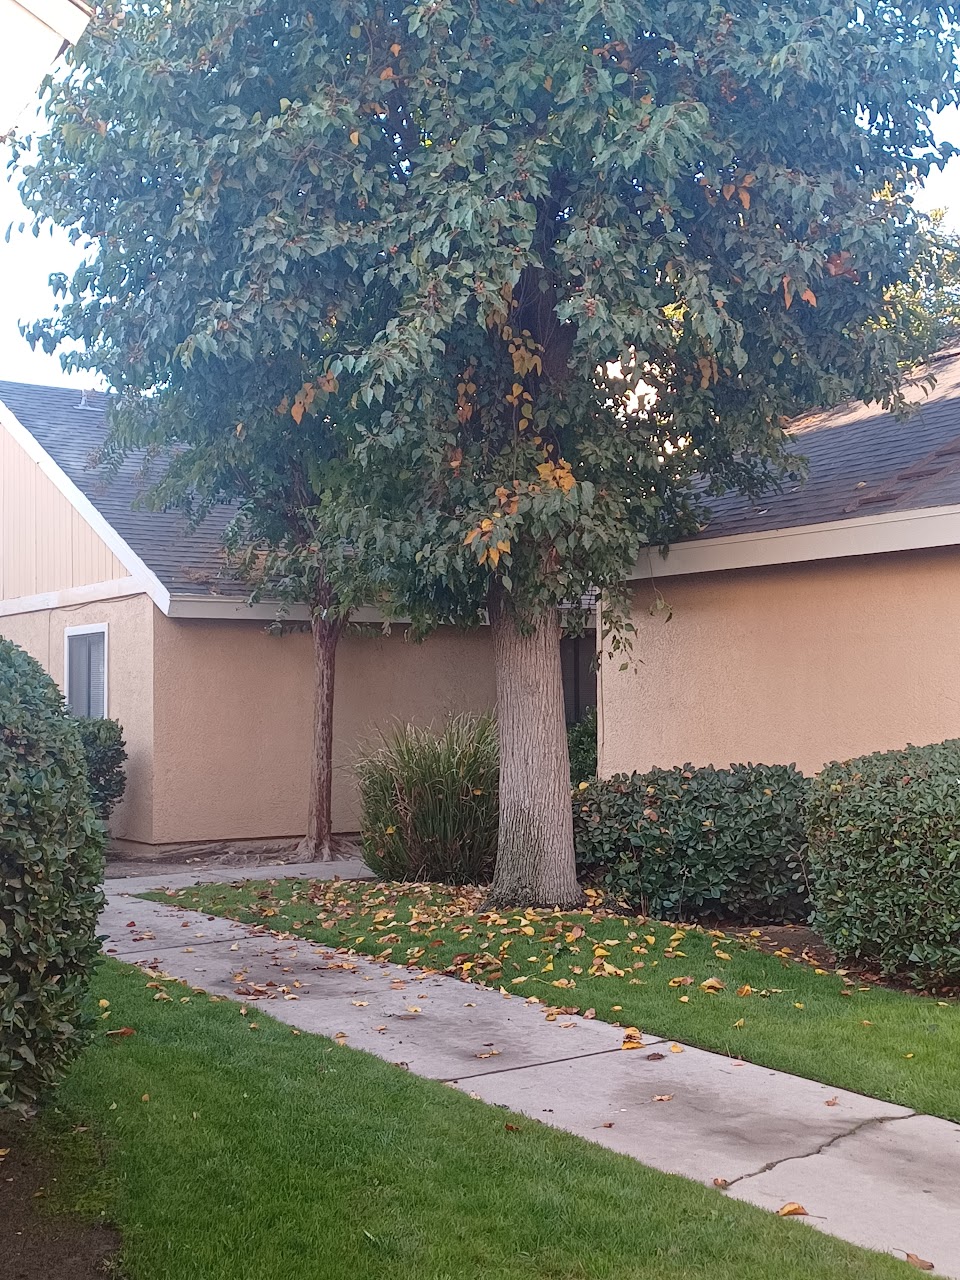 Photo of FRESNO ARMS APTS. Affordable housing located at 2264 N MARKS AVE FRESNO, CA 93722